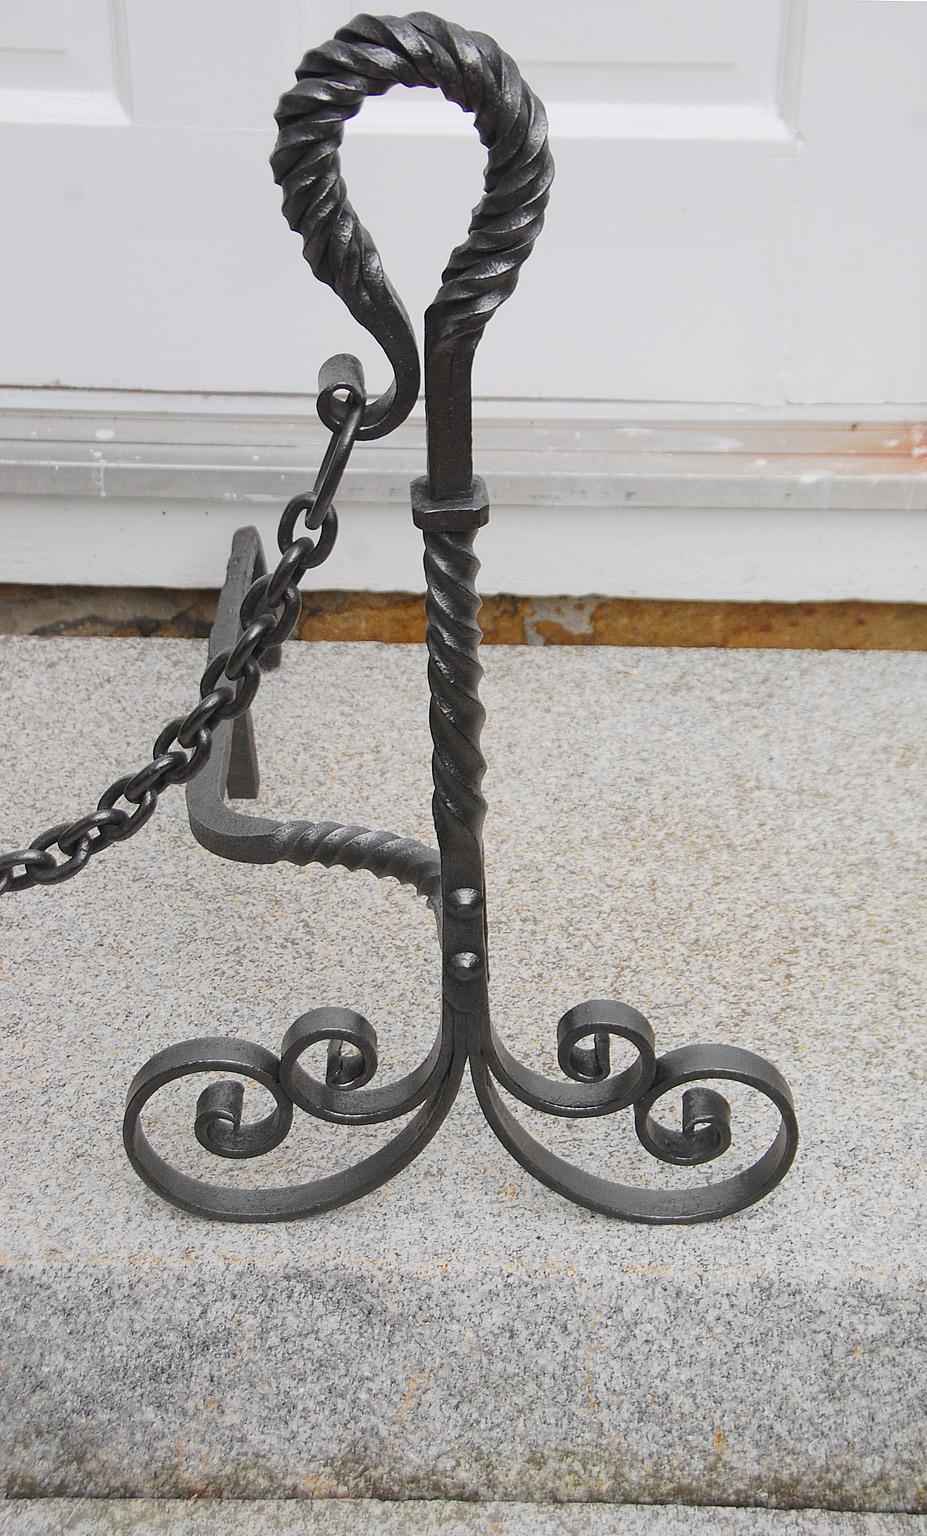 American Arts and Crafts Period wrought iron pair of andions. These 24 1/2 inch high hand wrought andirons have twist loop tops and hand split iron scrolling base. Complete with removable chain. Circa 1900.